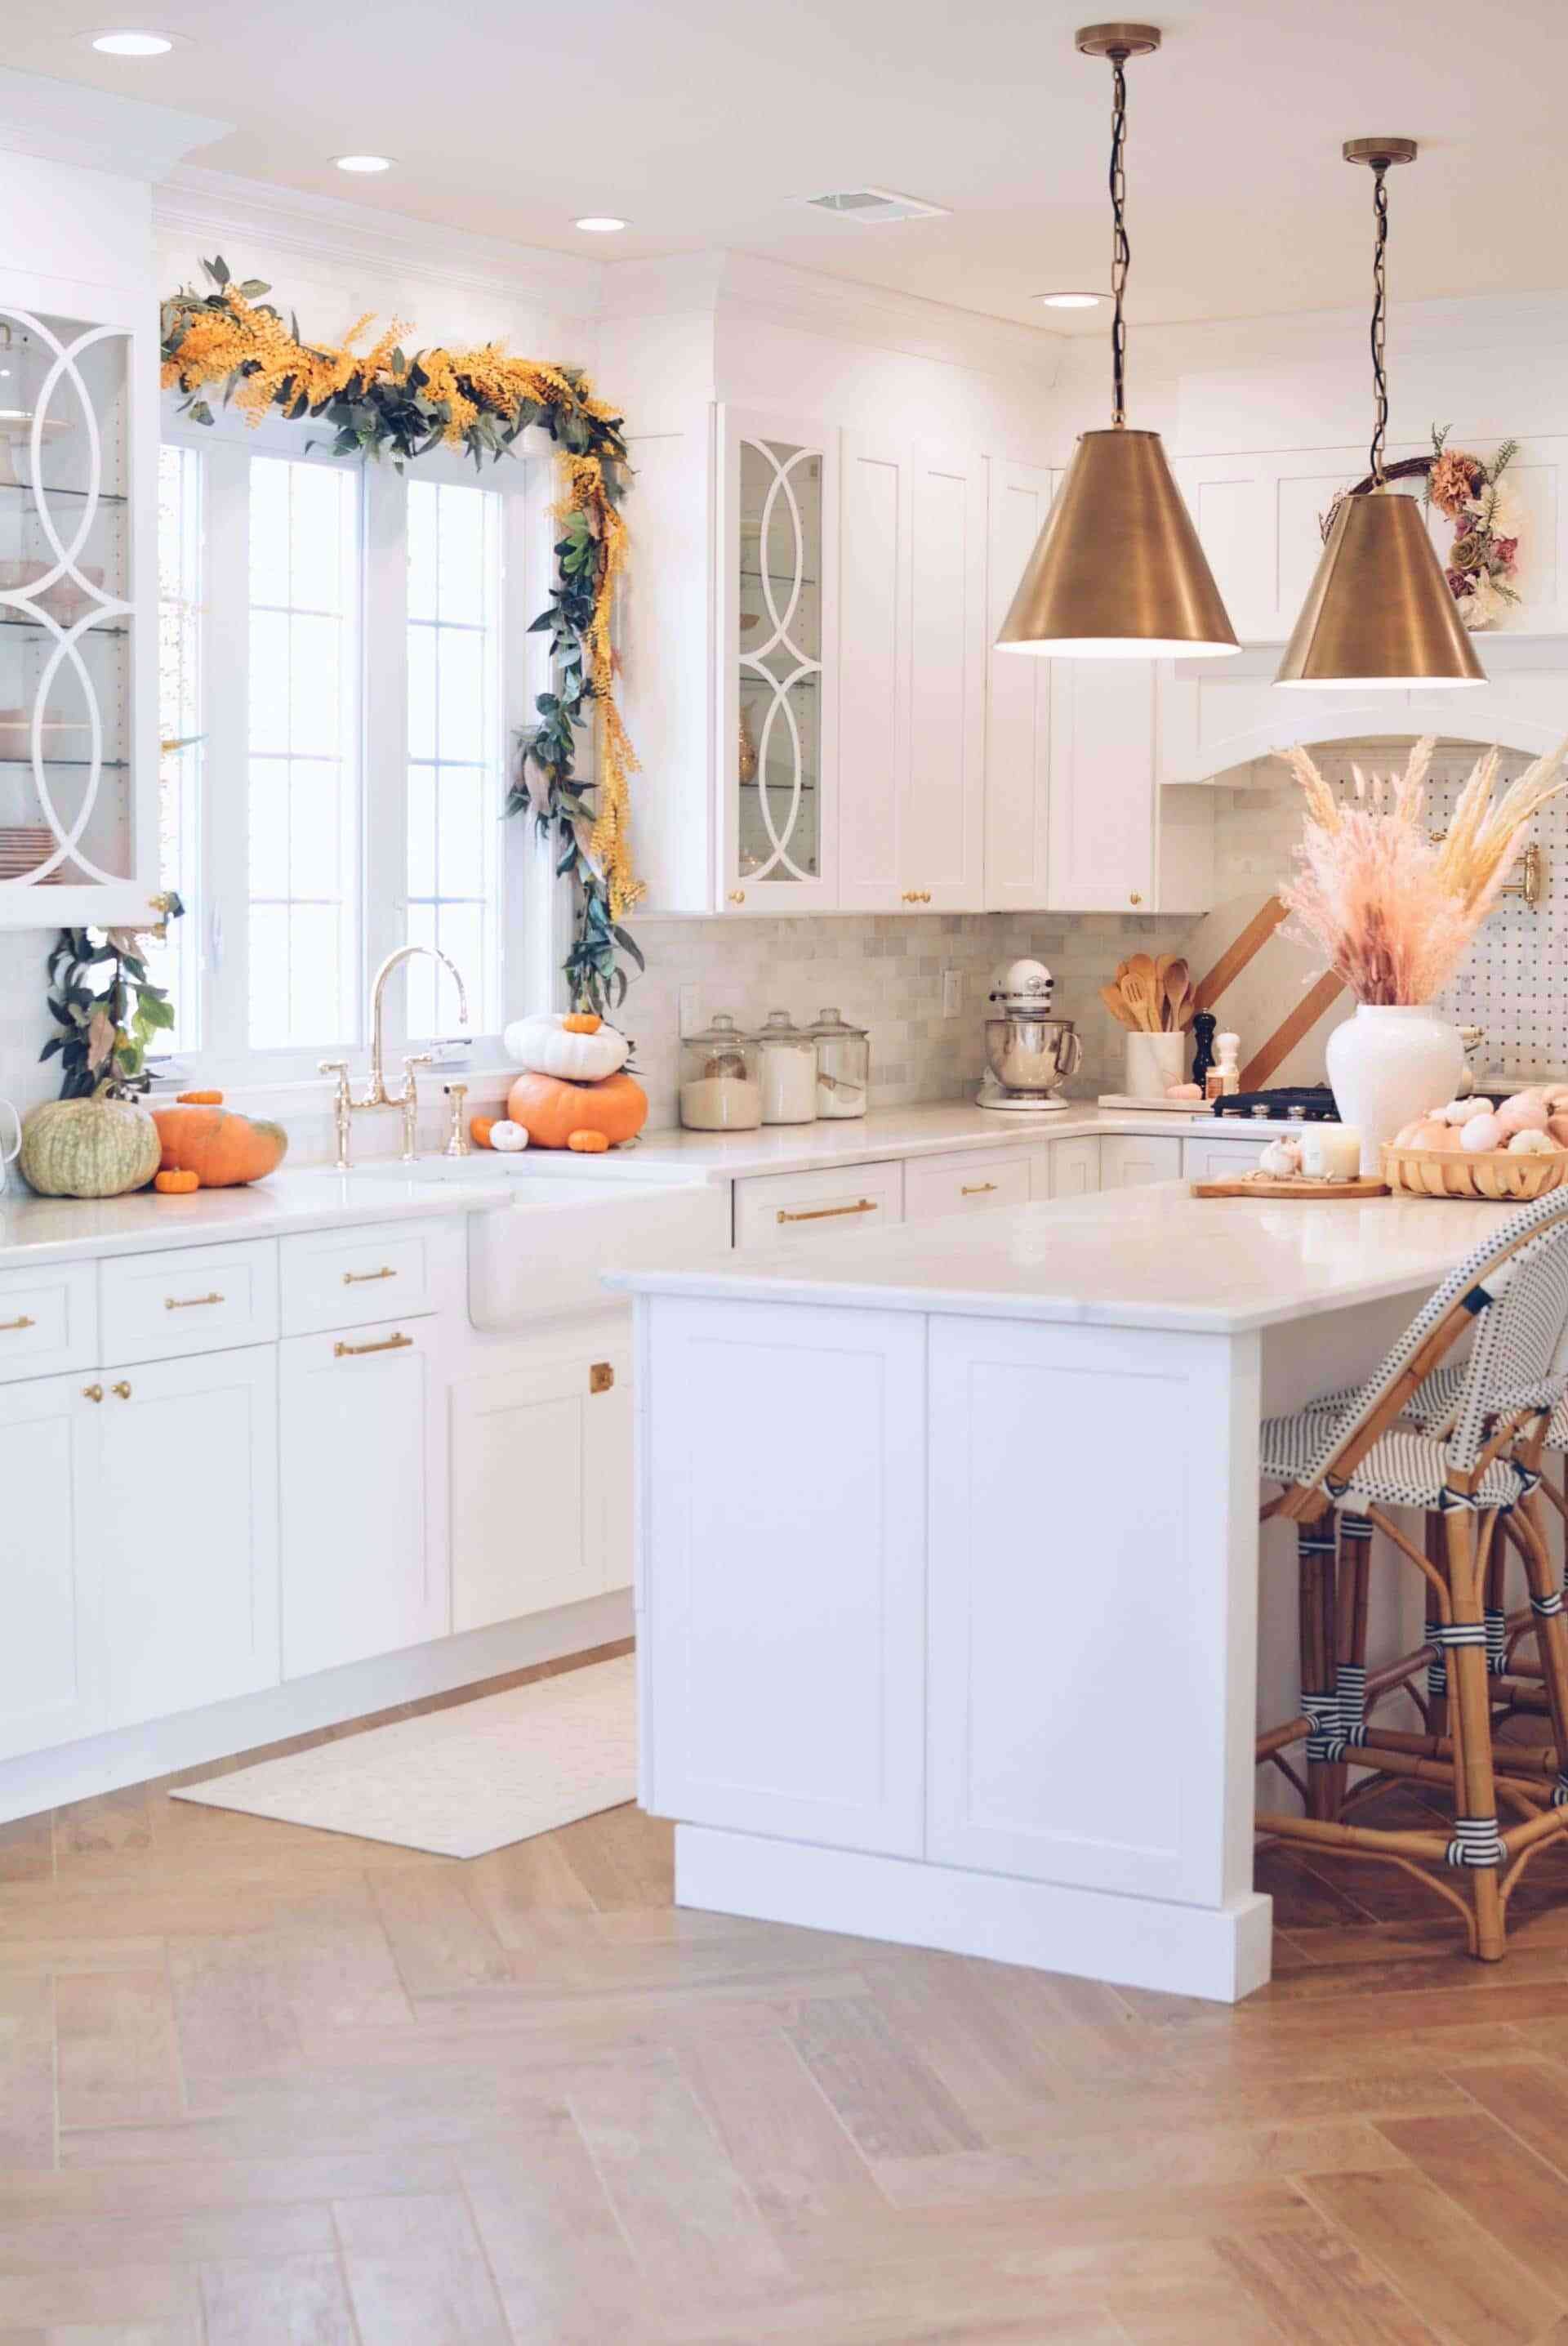 20 CHIC FALL DECOR IDEAS FOR 2019